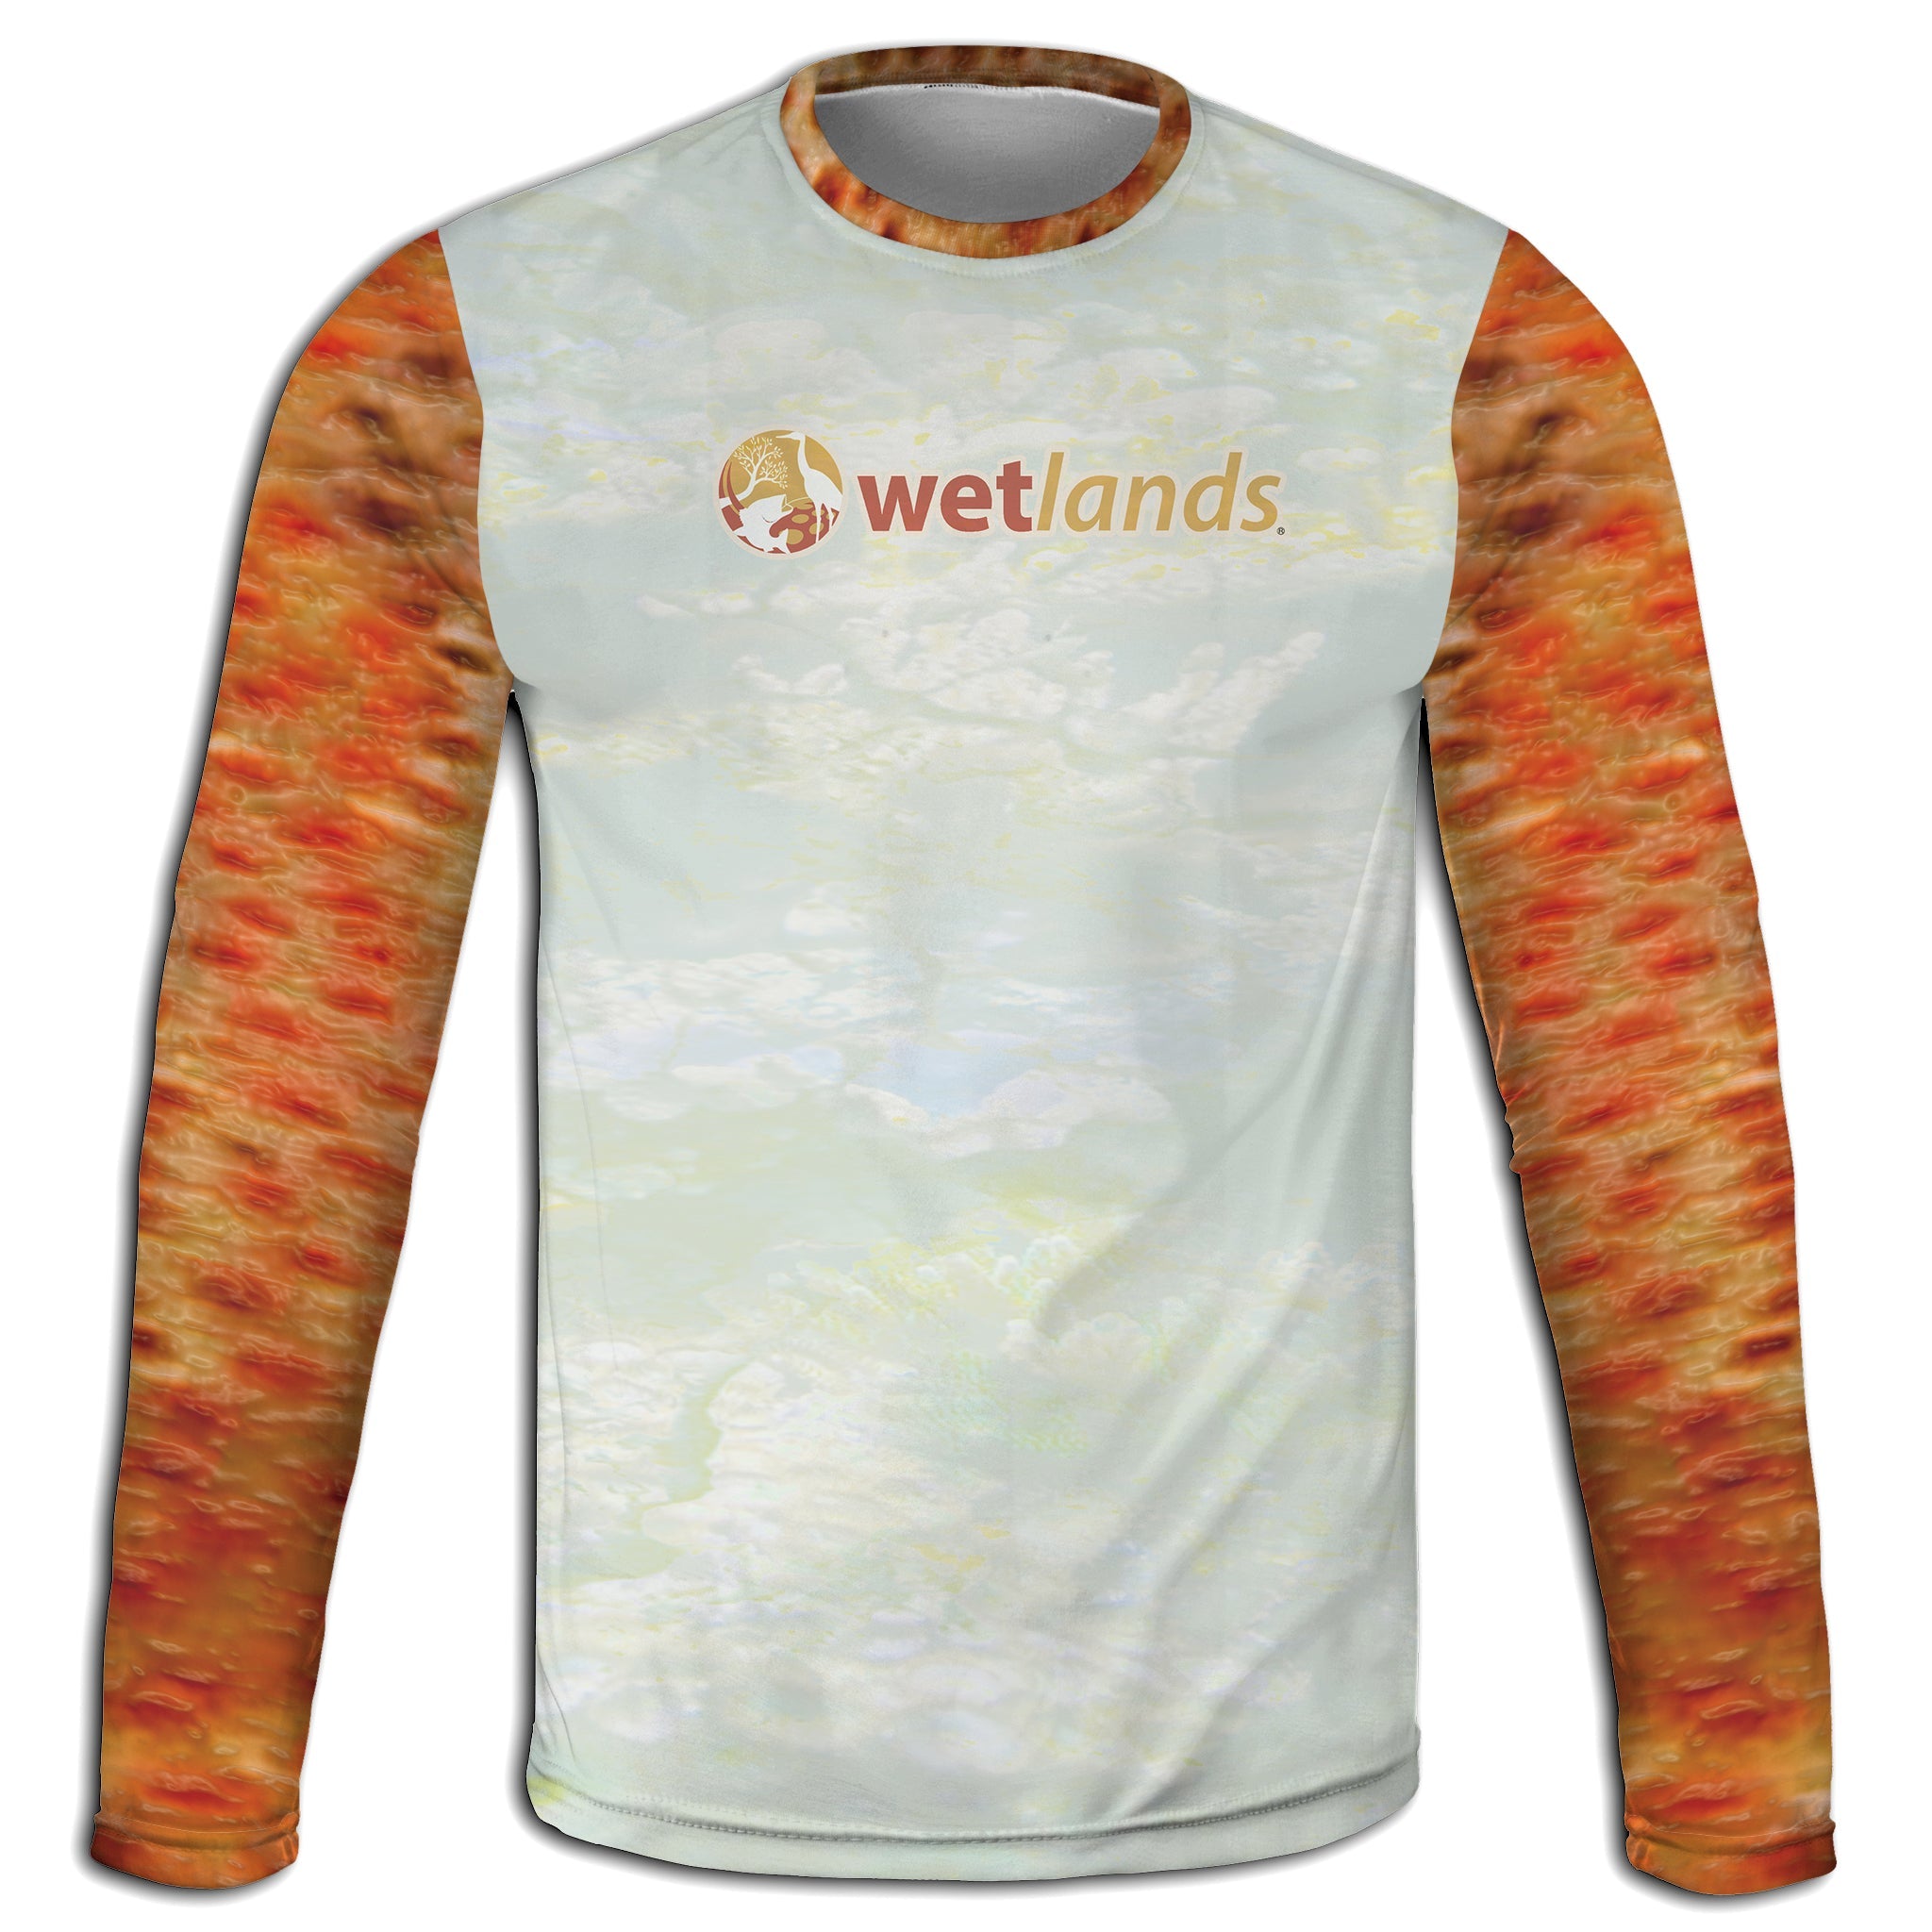 Red Hind Wetlands Performance Apparel